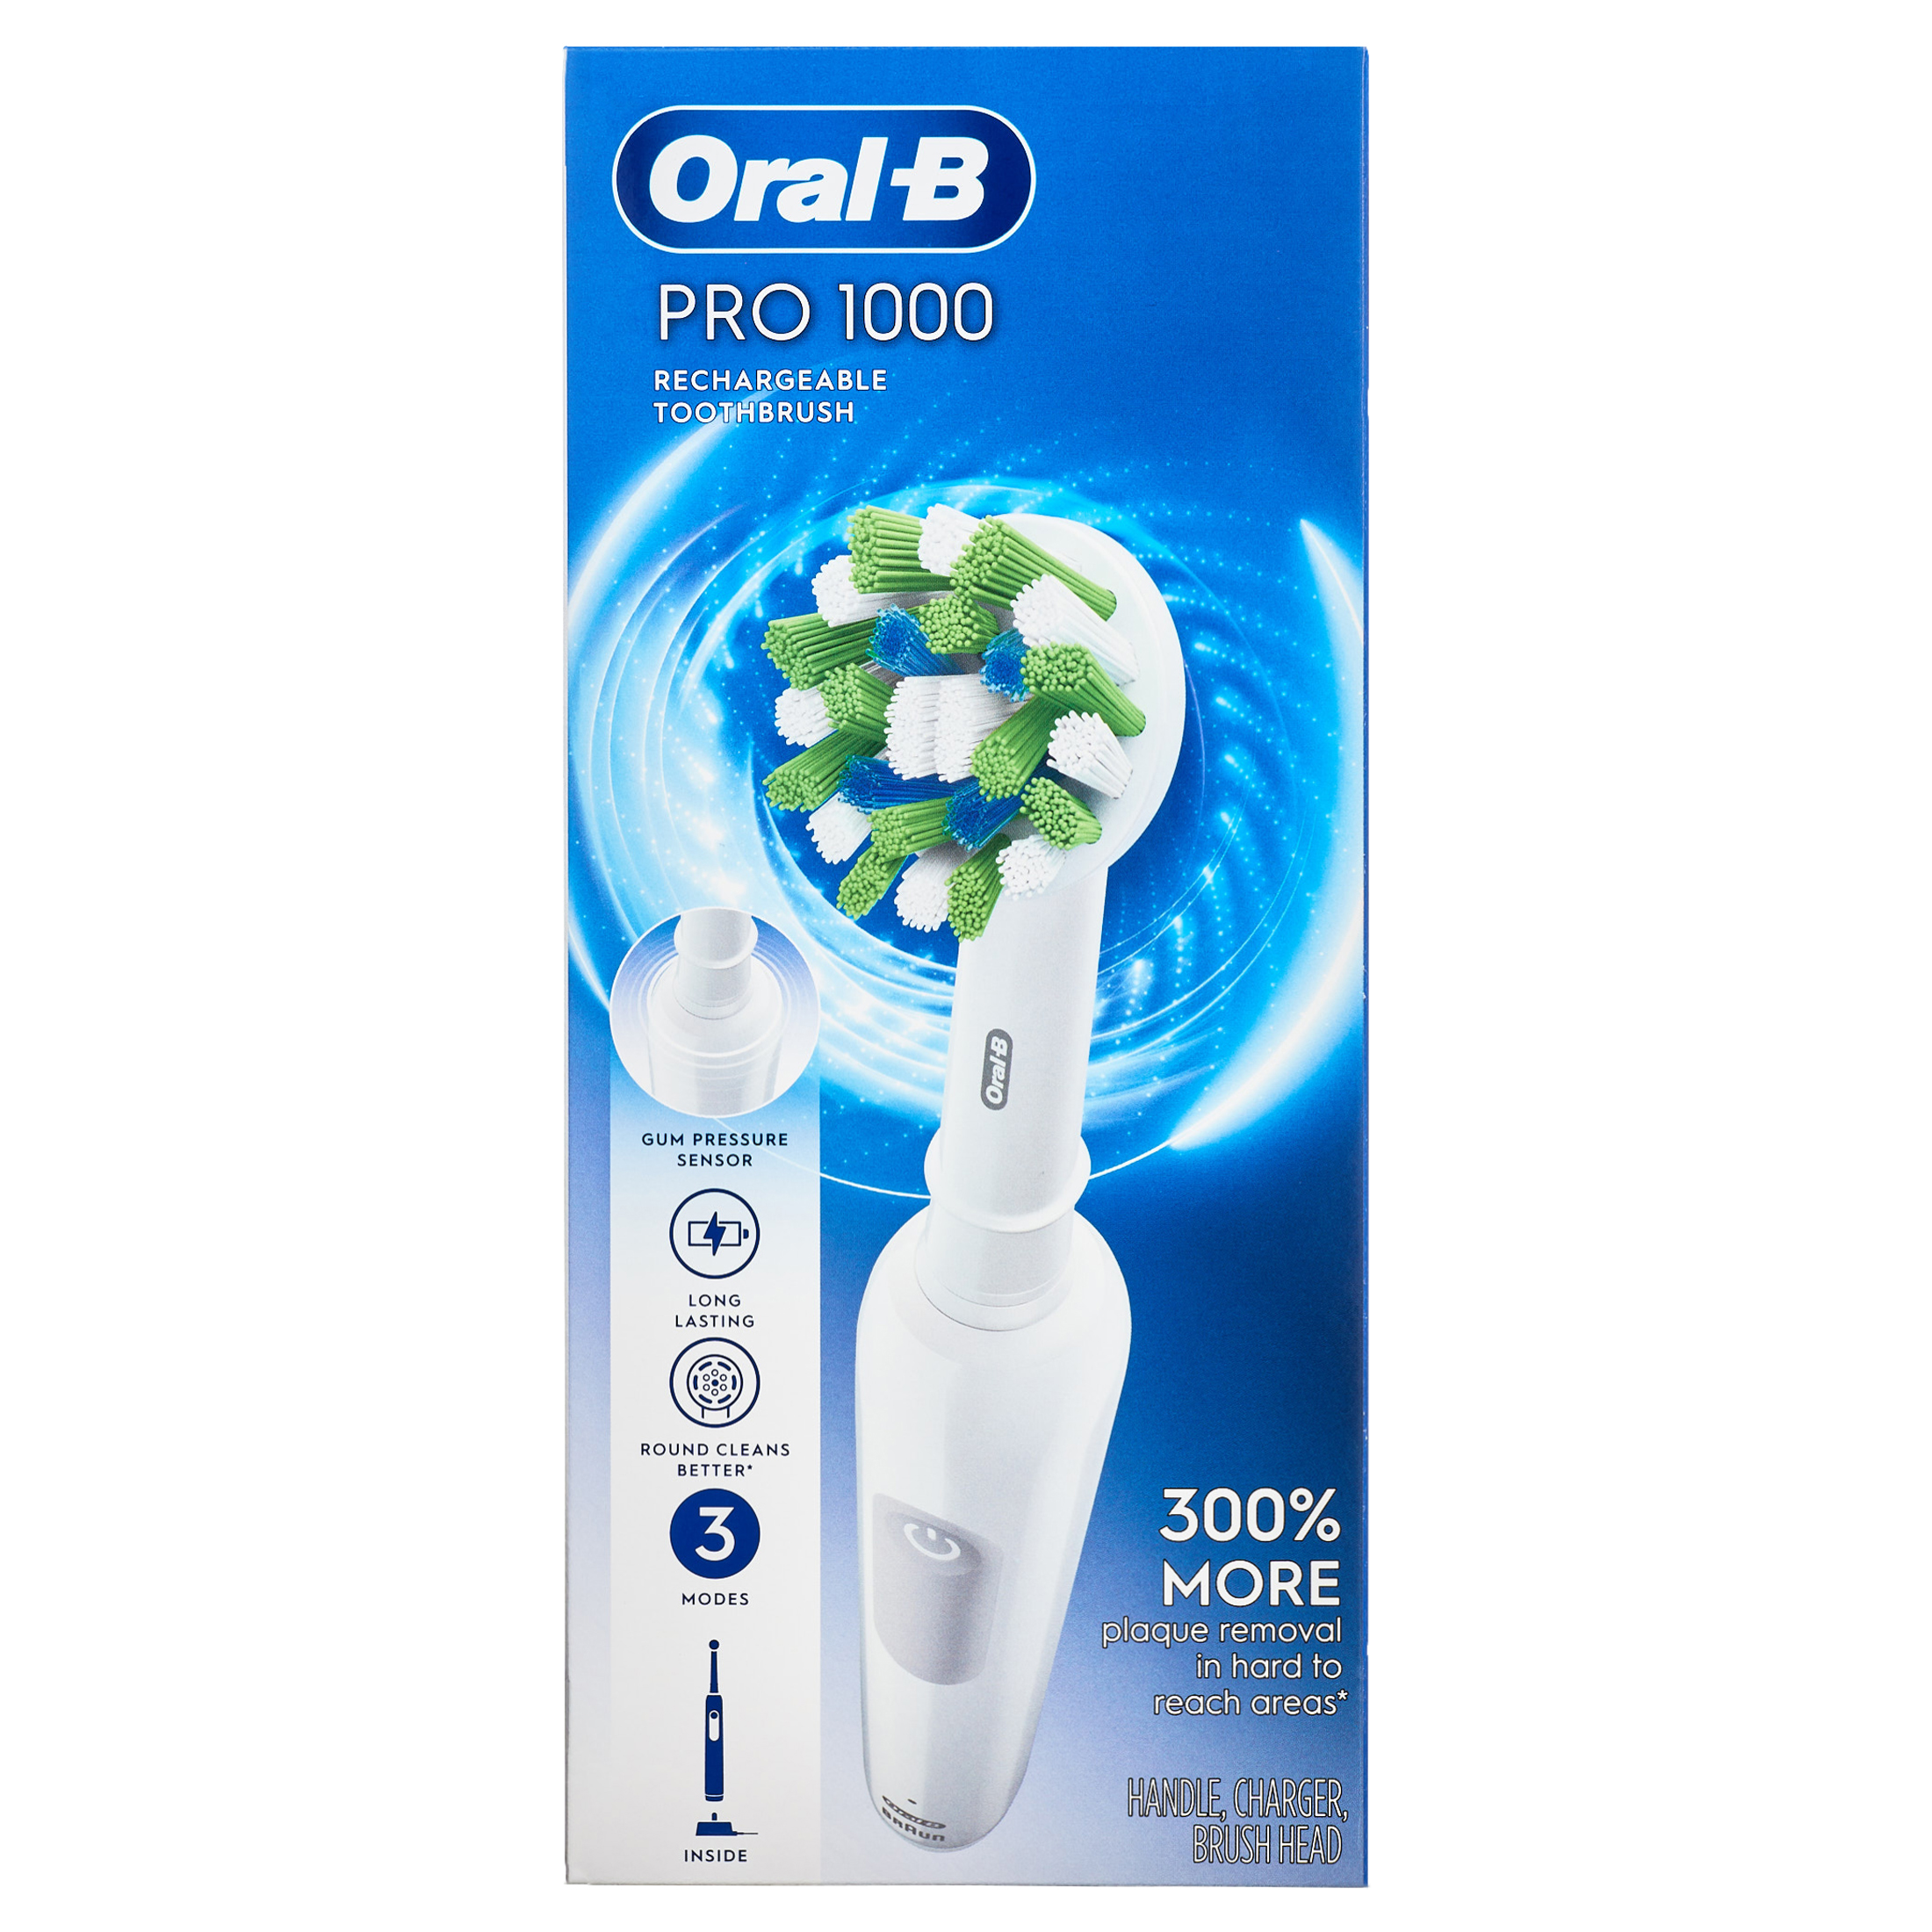 Oral-B Pro 1000 Rechargeable Electric Toothbrush, White, 1 Ct - image 2 of 13